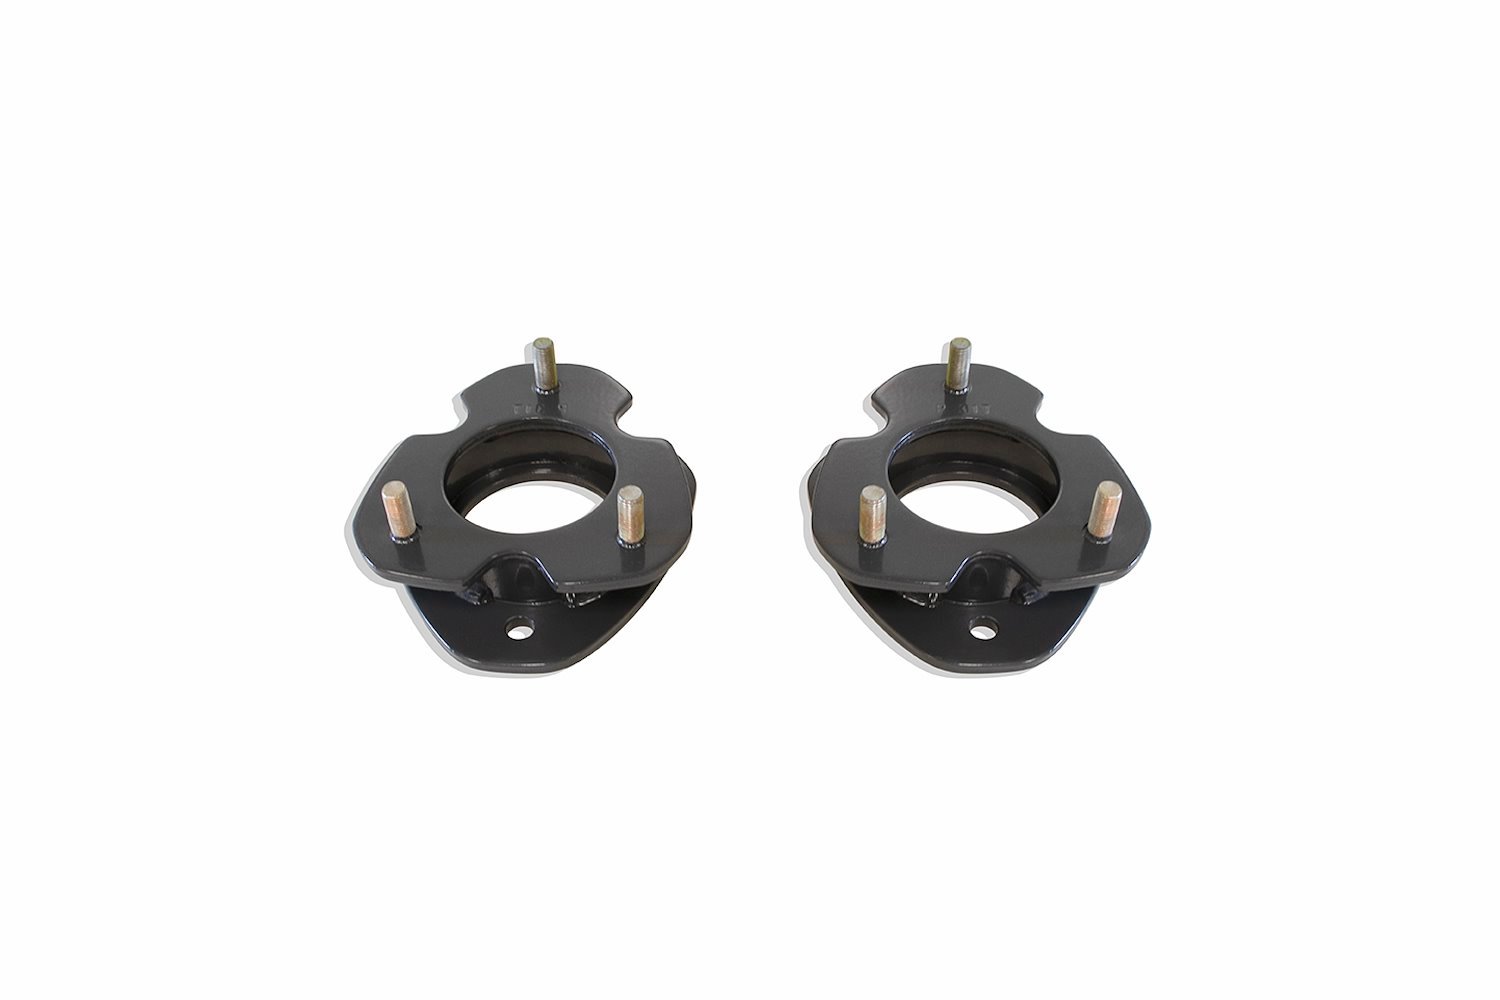 833125 2.5" Front Strut Spacers Fits 2004-2008 Ford F-150